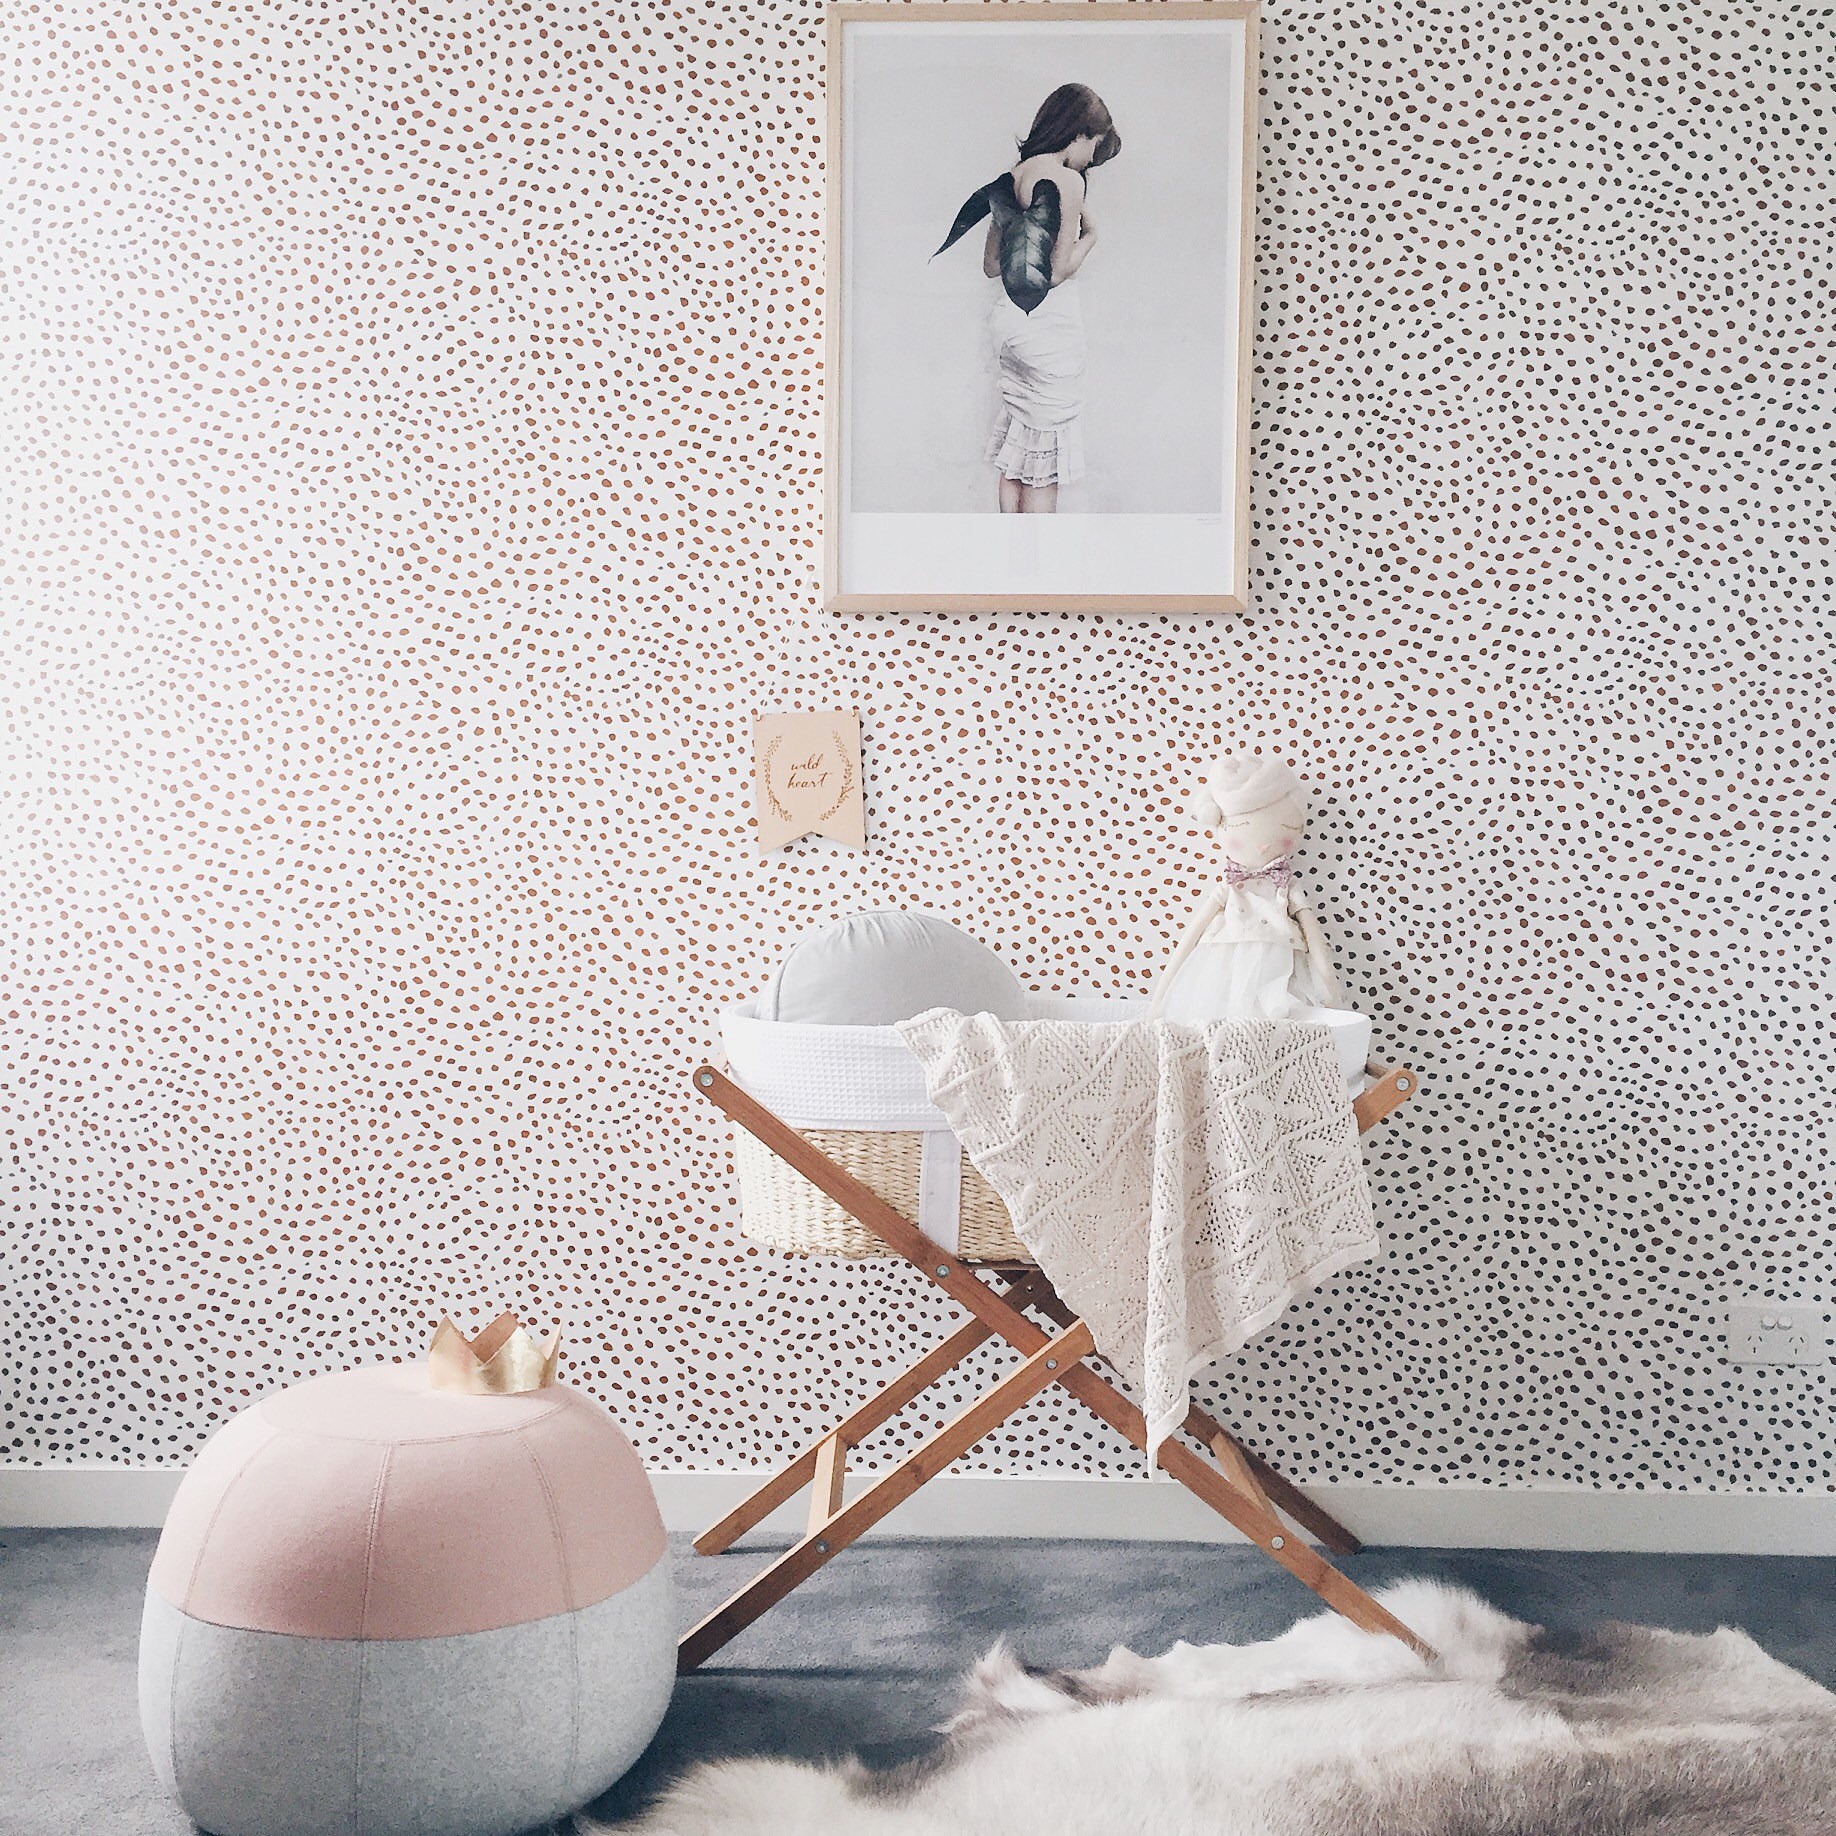 Processed With Vscocam With Hb1 Preset - Scallop Dots Wallpaper Uk - HD Wallpaper 